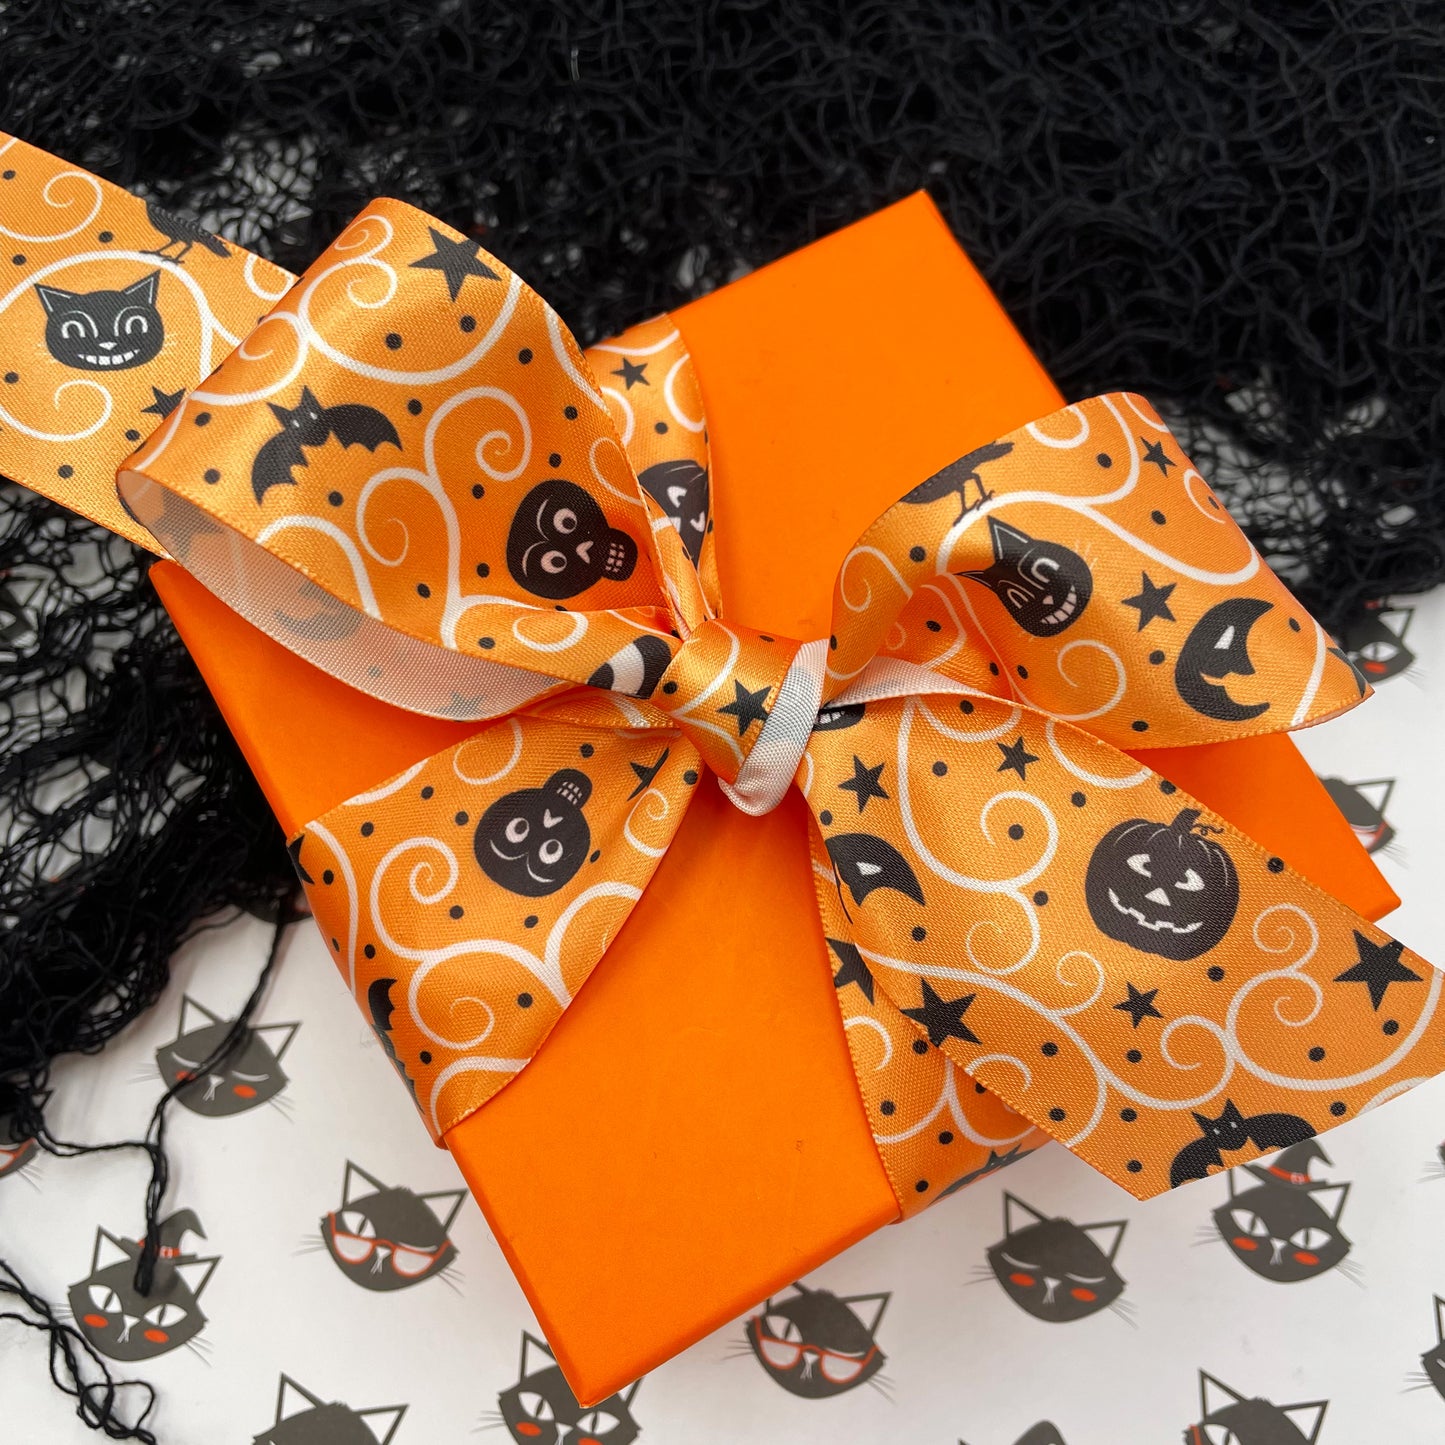 Vintage Halloween ribbon featuring black cats, jack o'lanterns, bats, stars and moons printed on an orange background with cream swirls on white satin